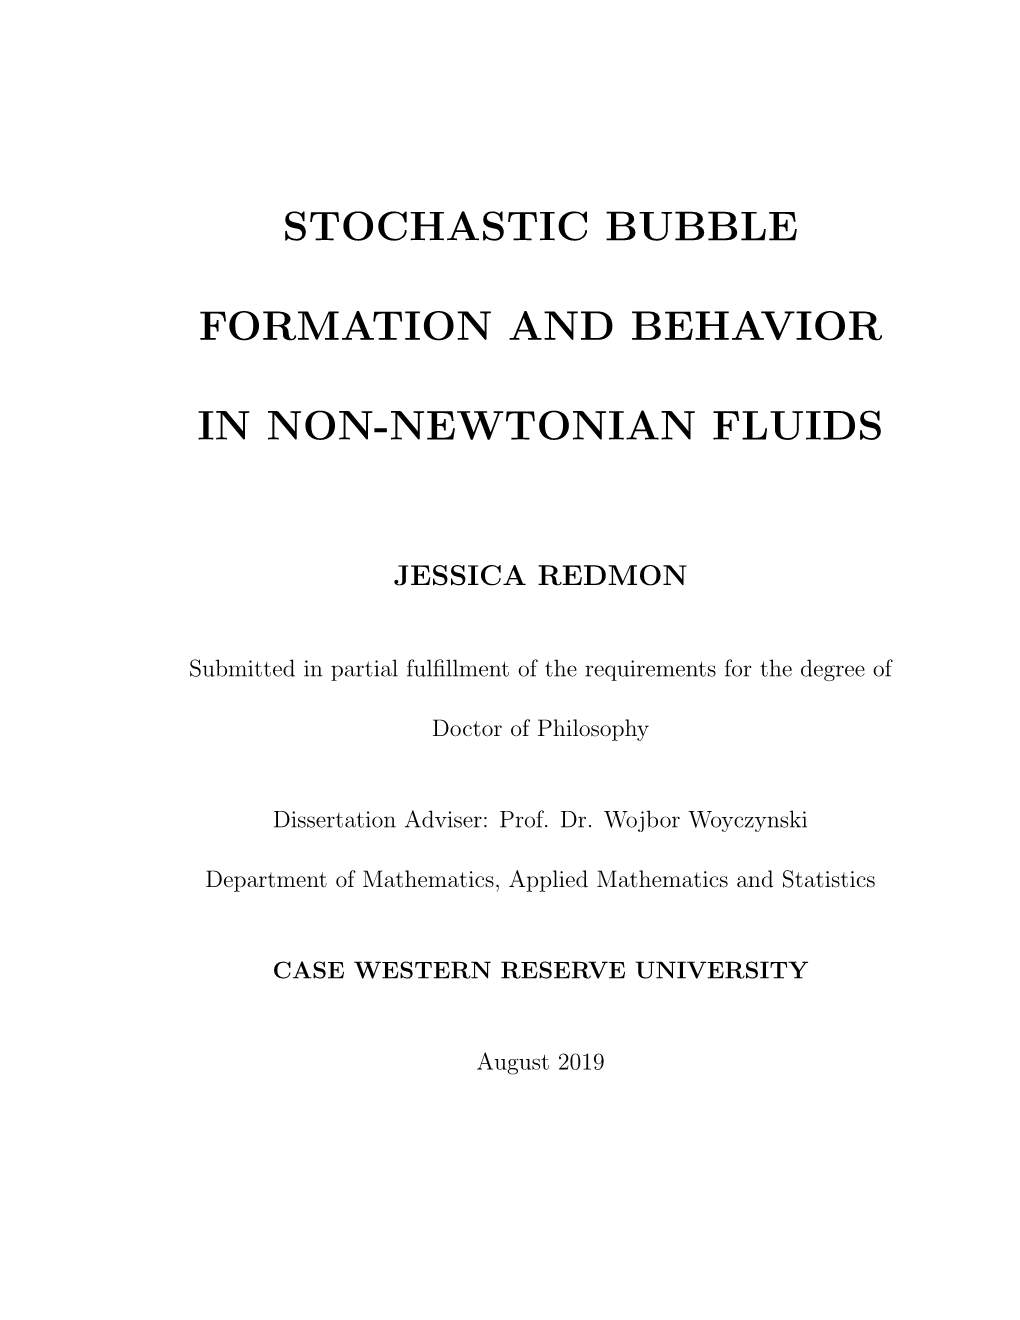 Stochastic Bubble Formation and Behavior in Non